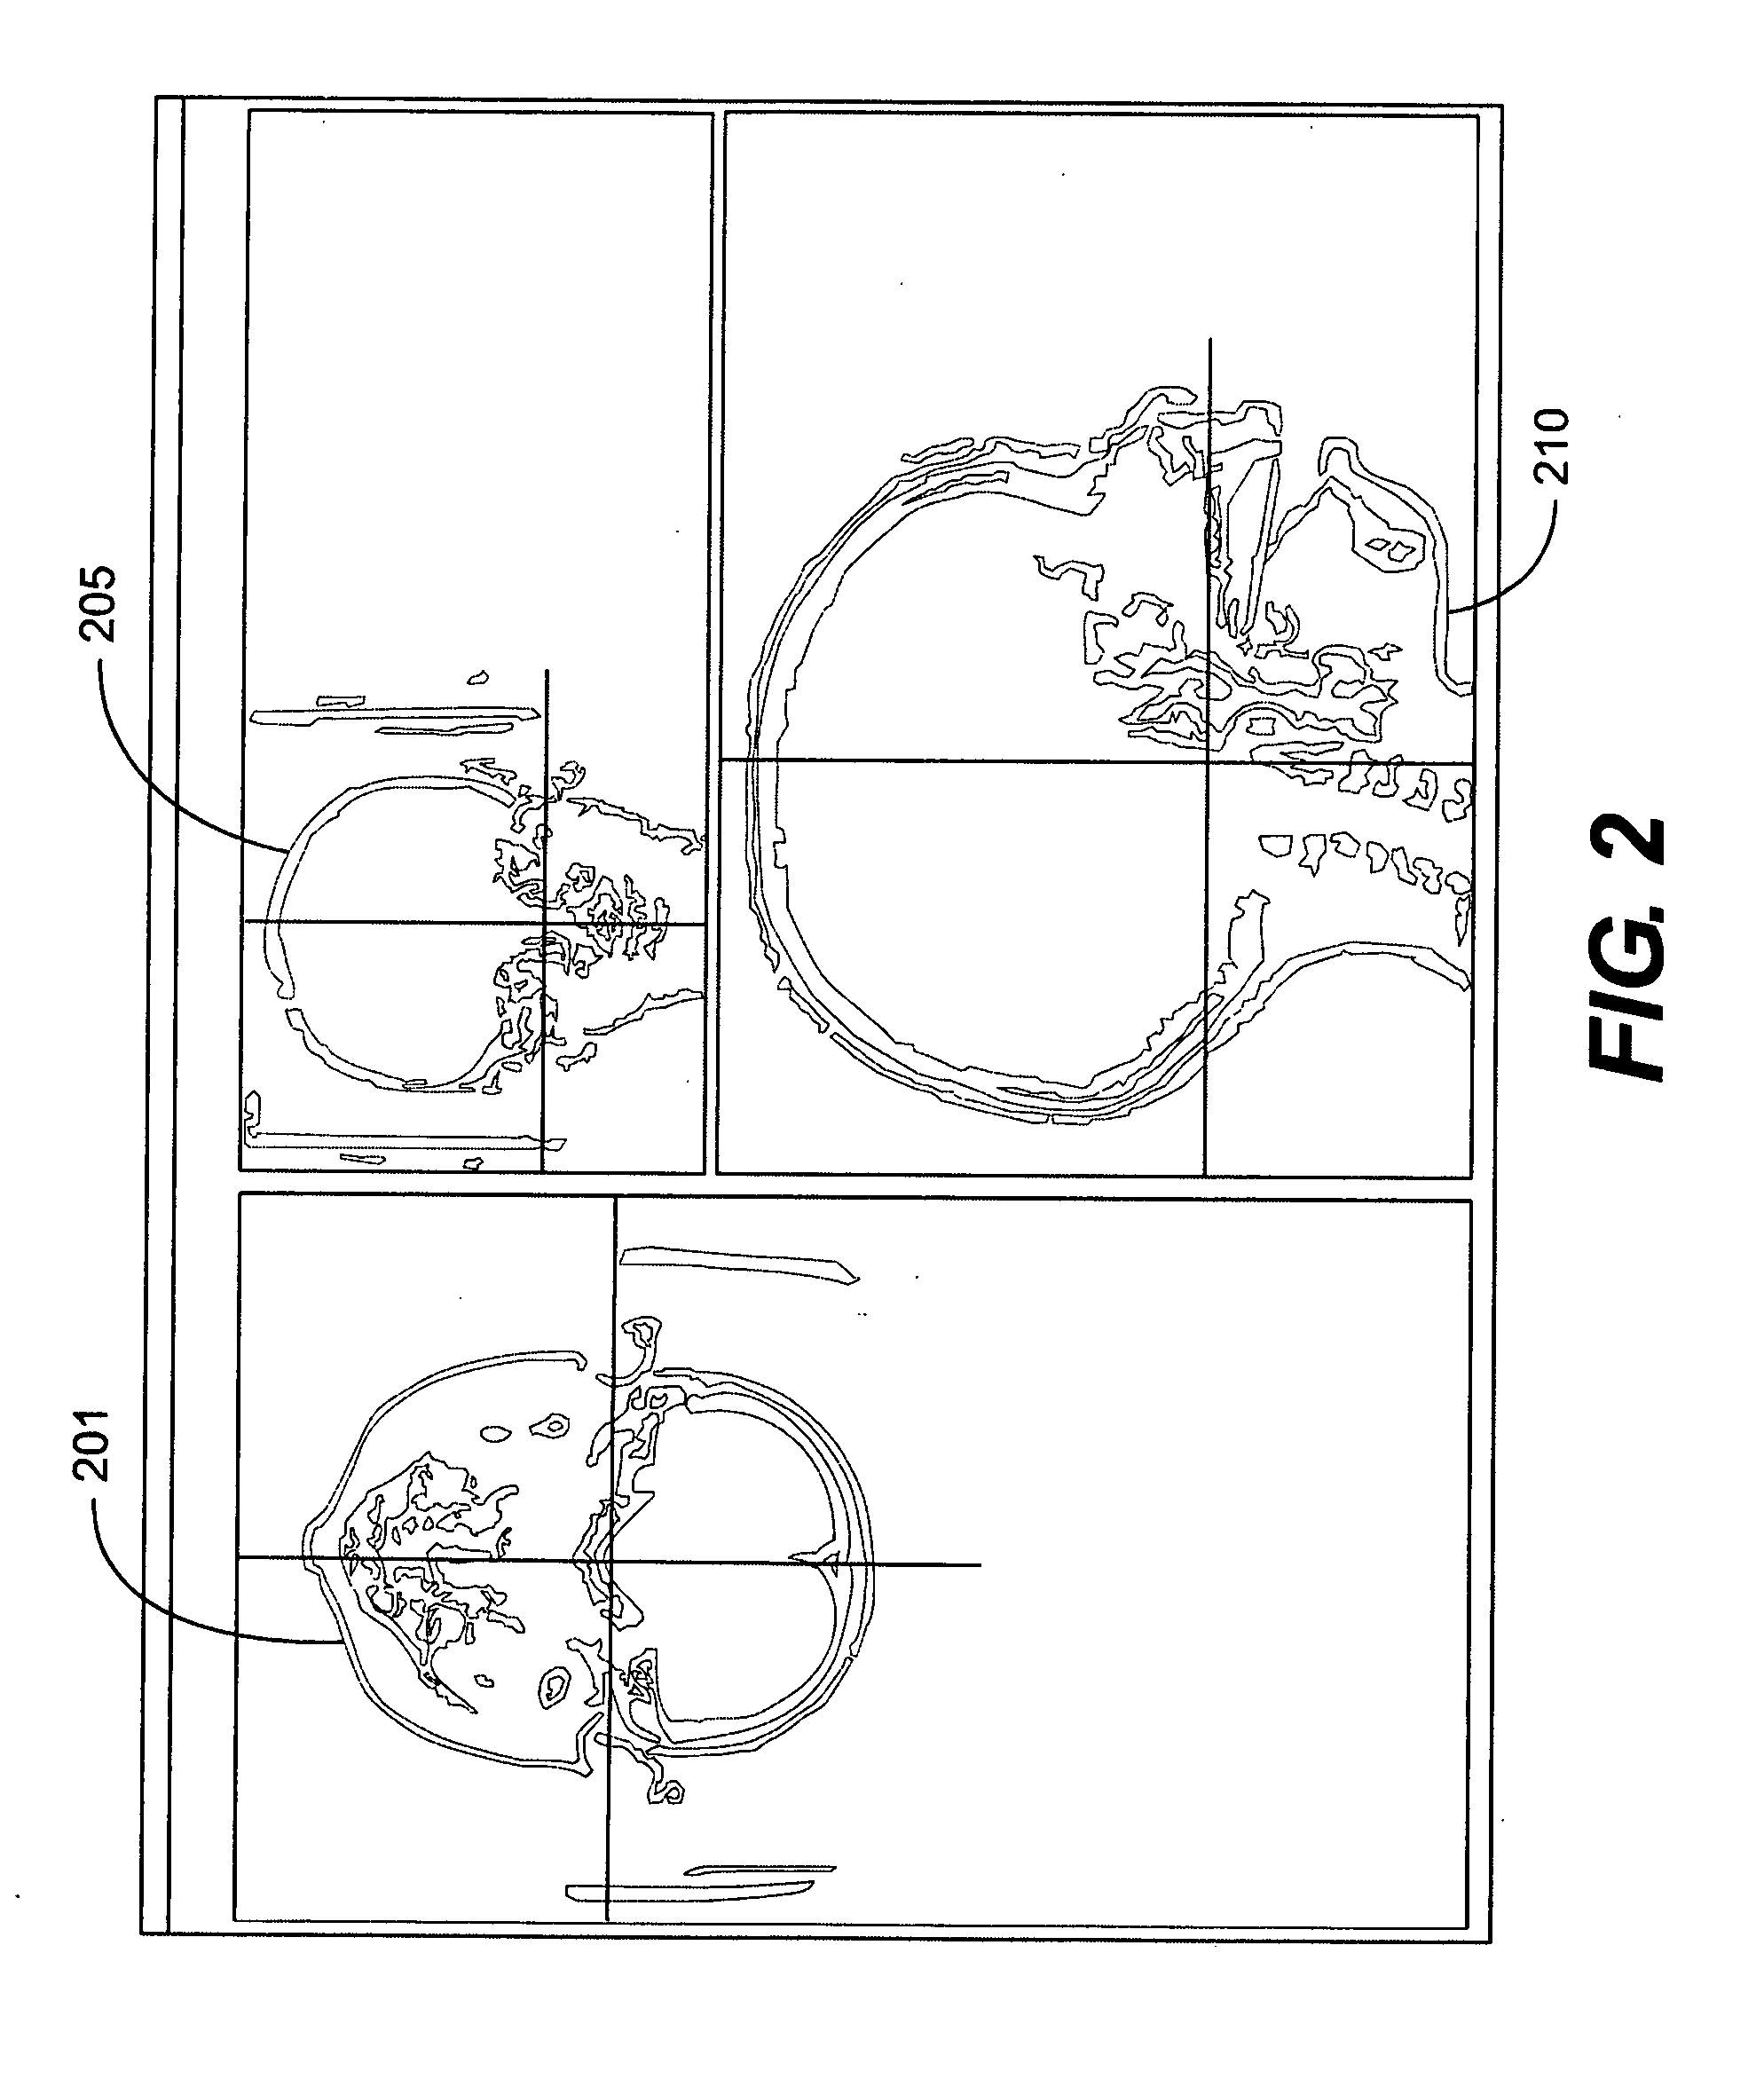 Haptic response system and method of use